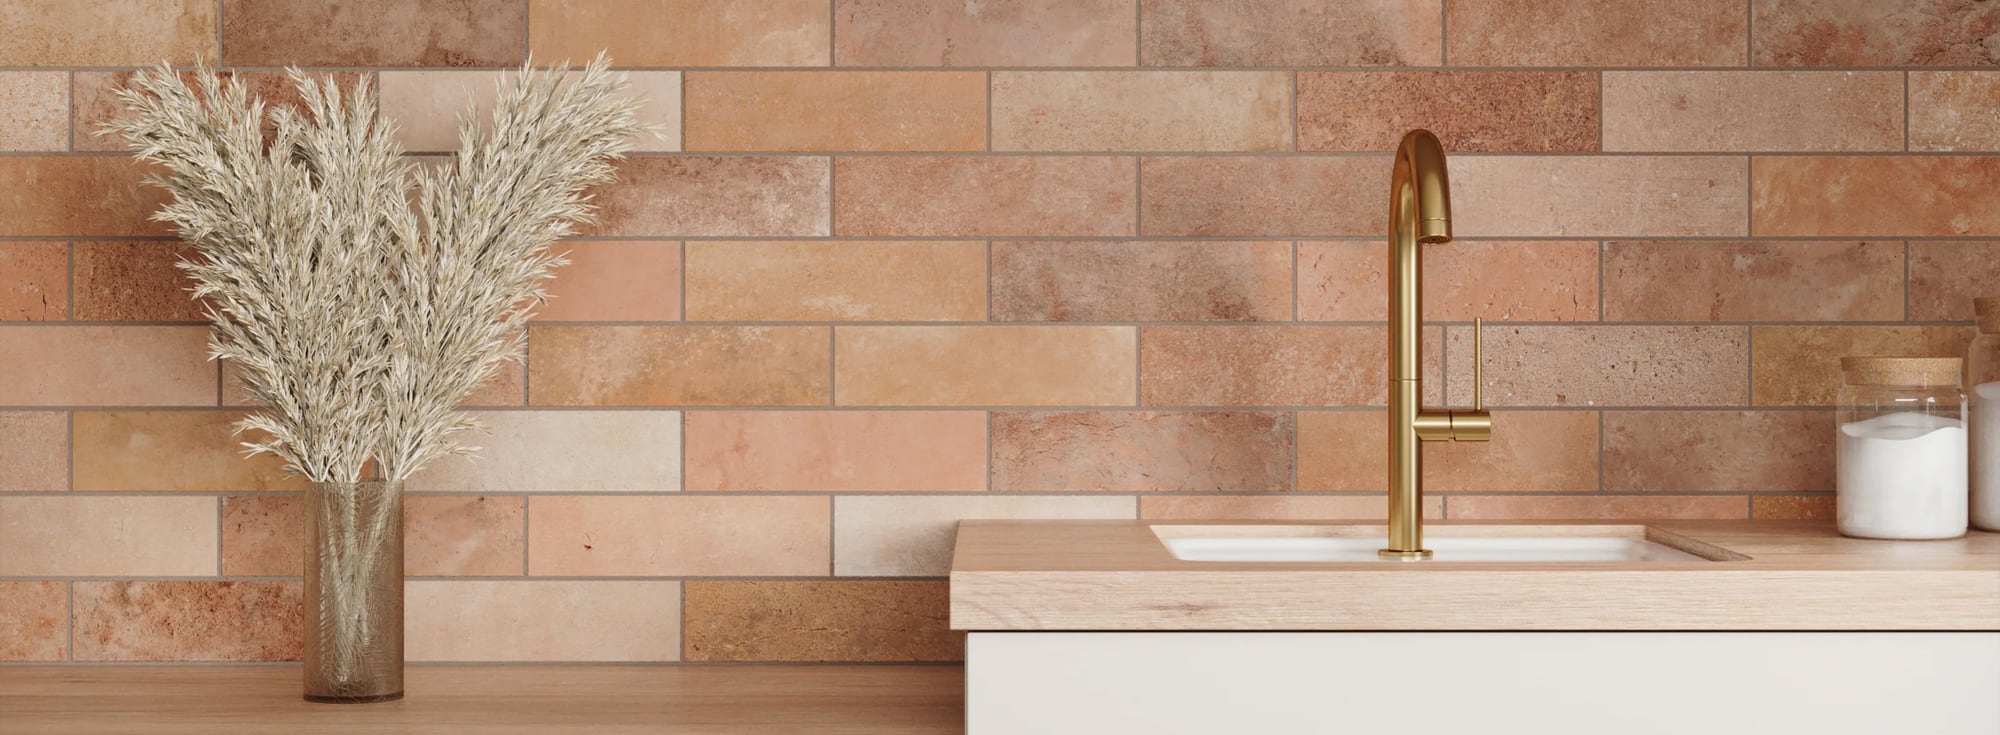 Warm-toned brick look tile adds rustic charm to a minimalist bathroom, complemented by a chic gold faucet